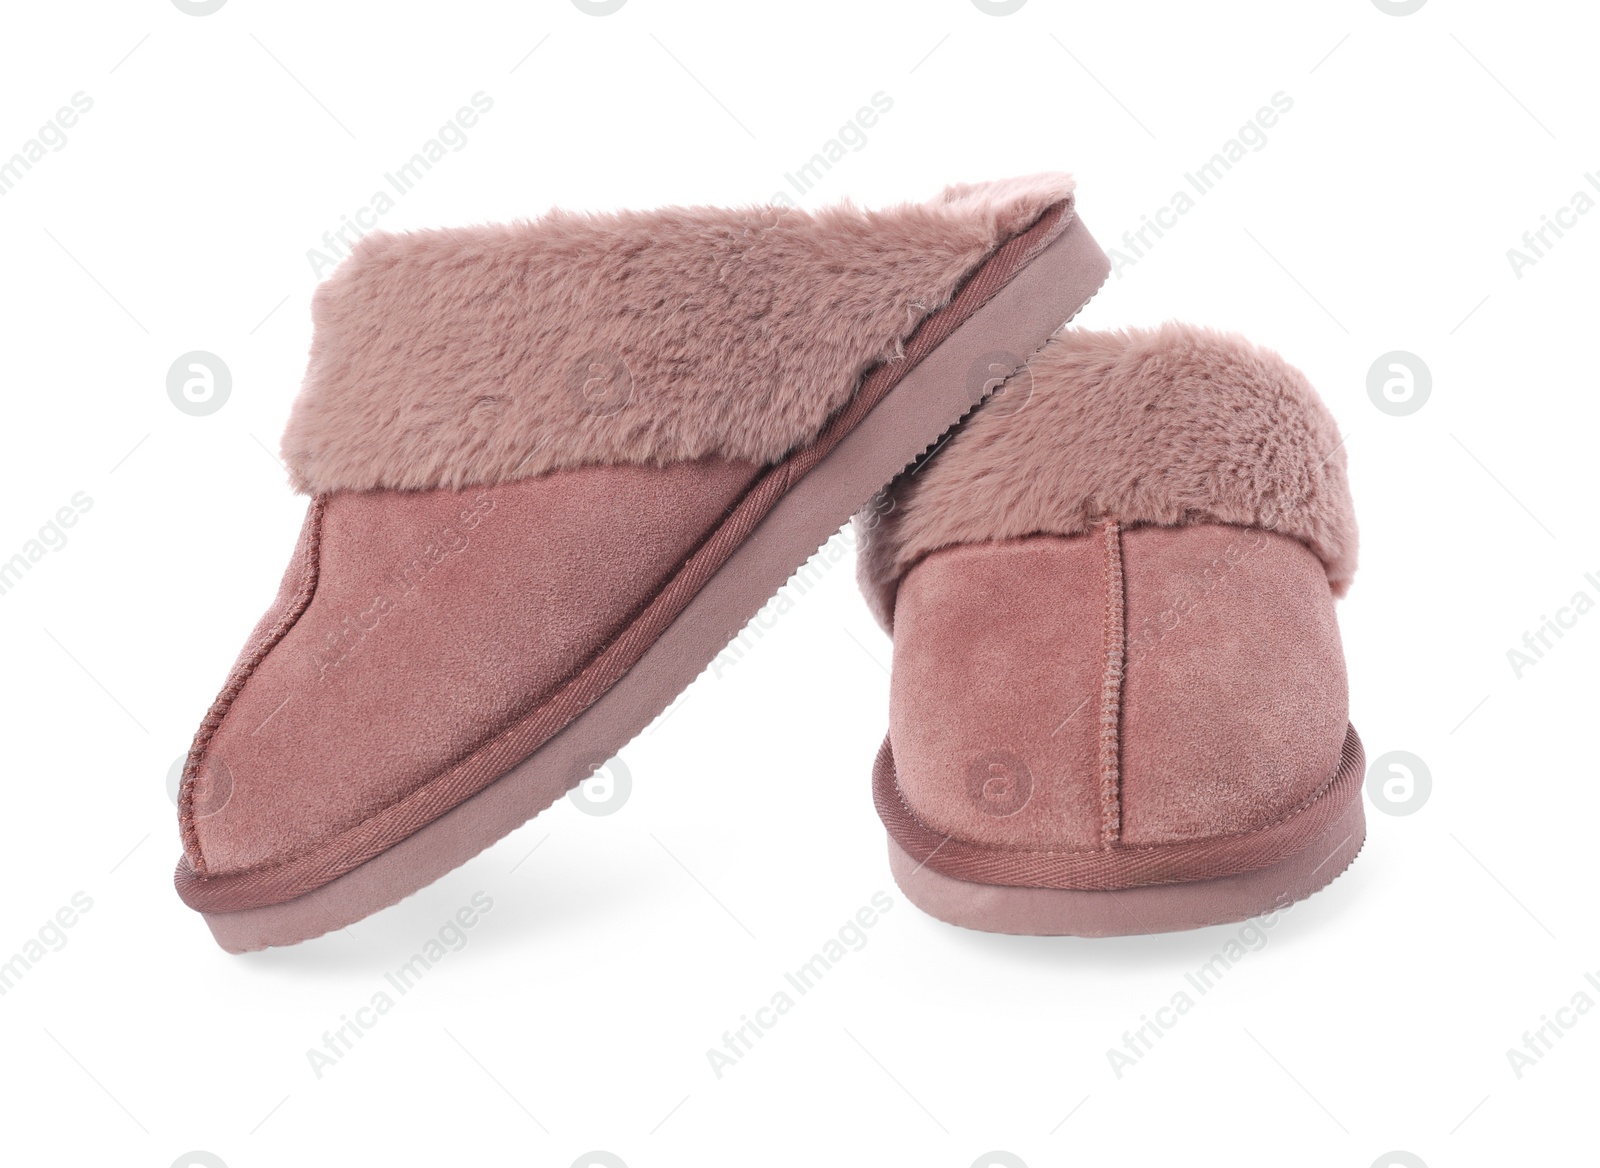 Photo of Pair of pink soft slippers isolated on white